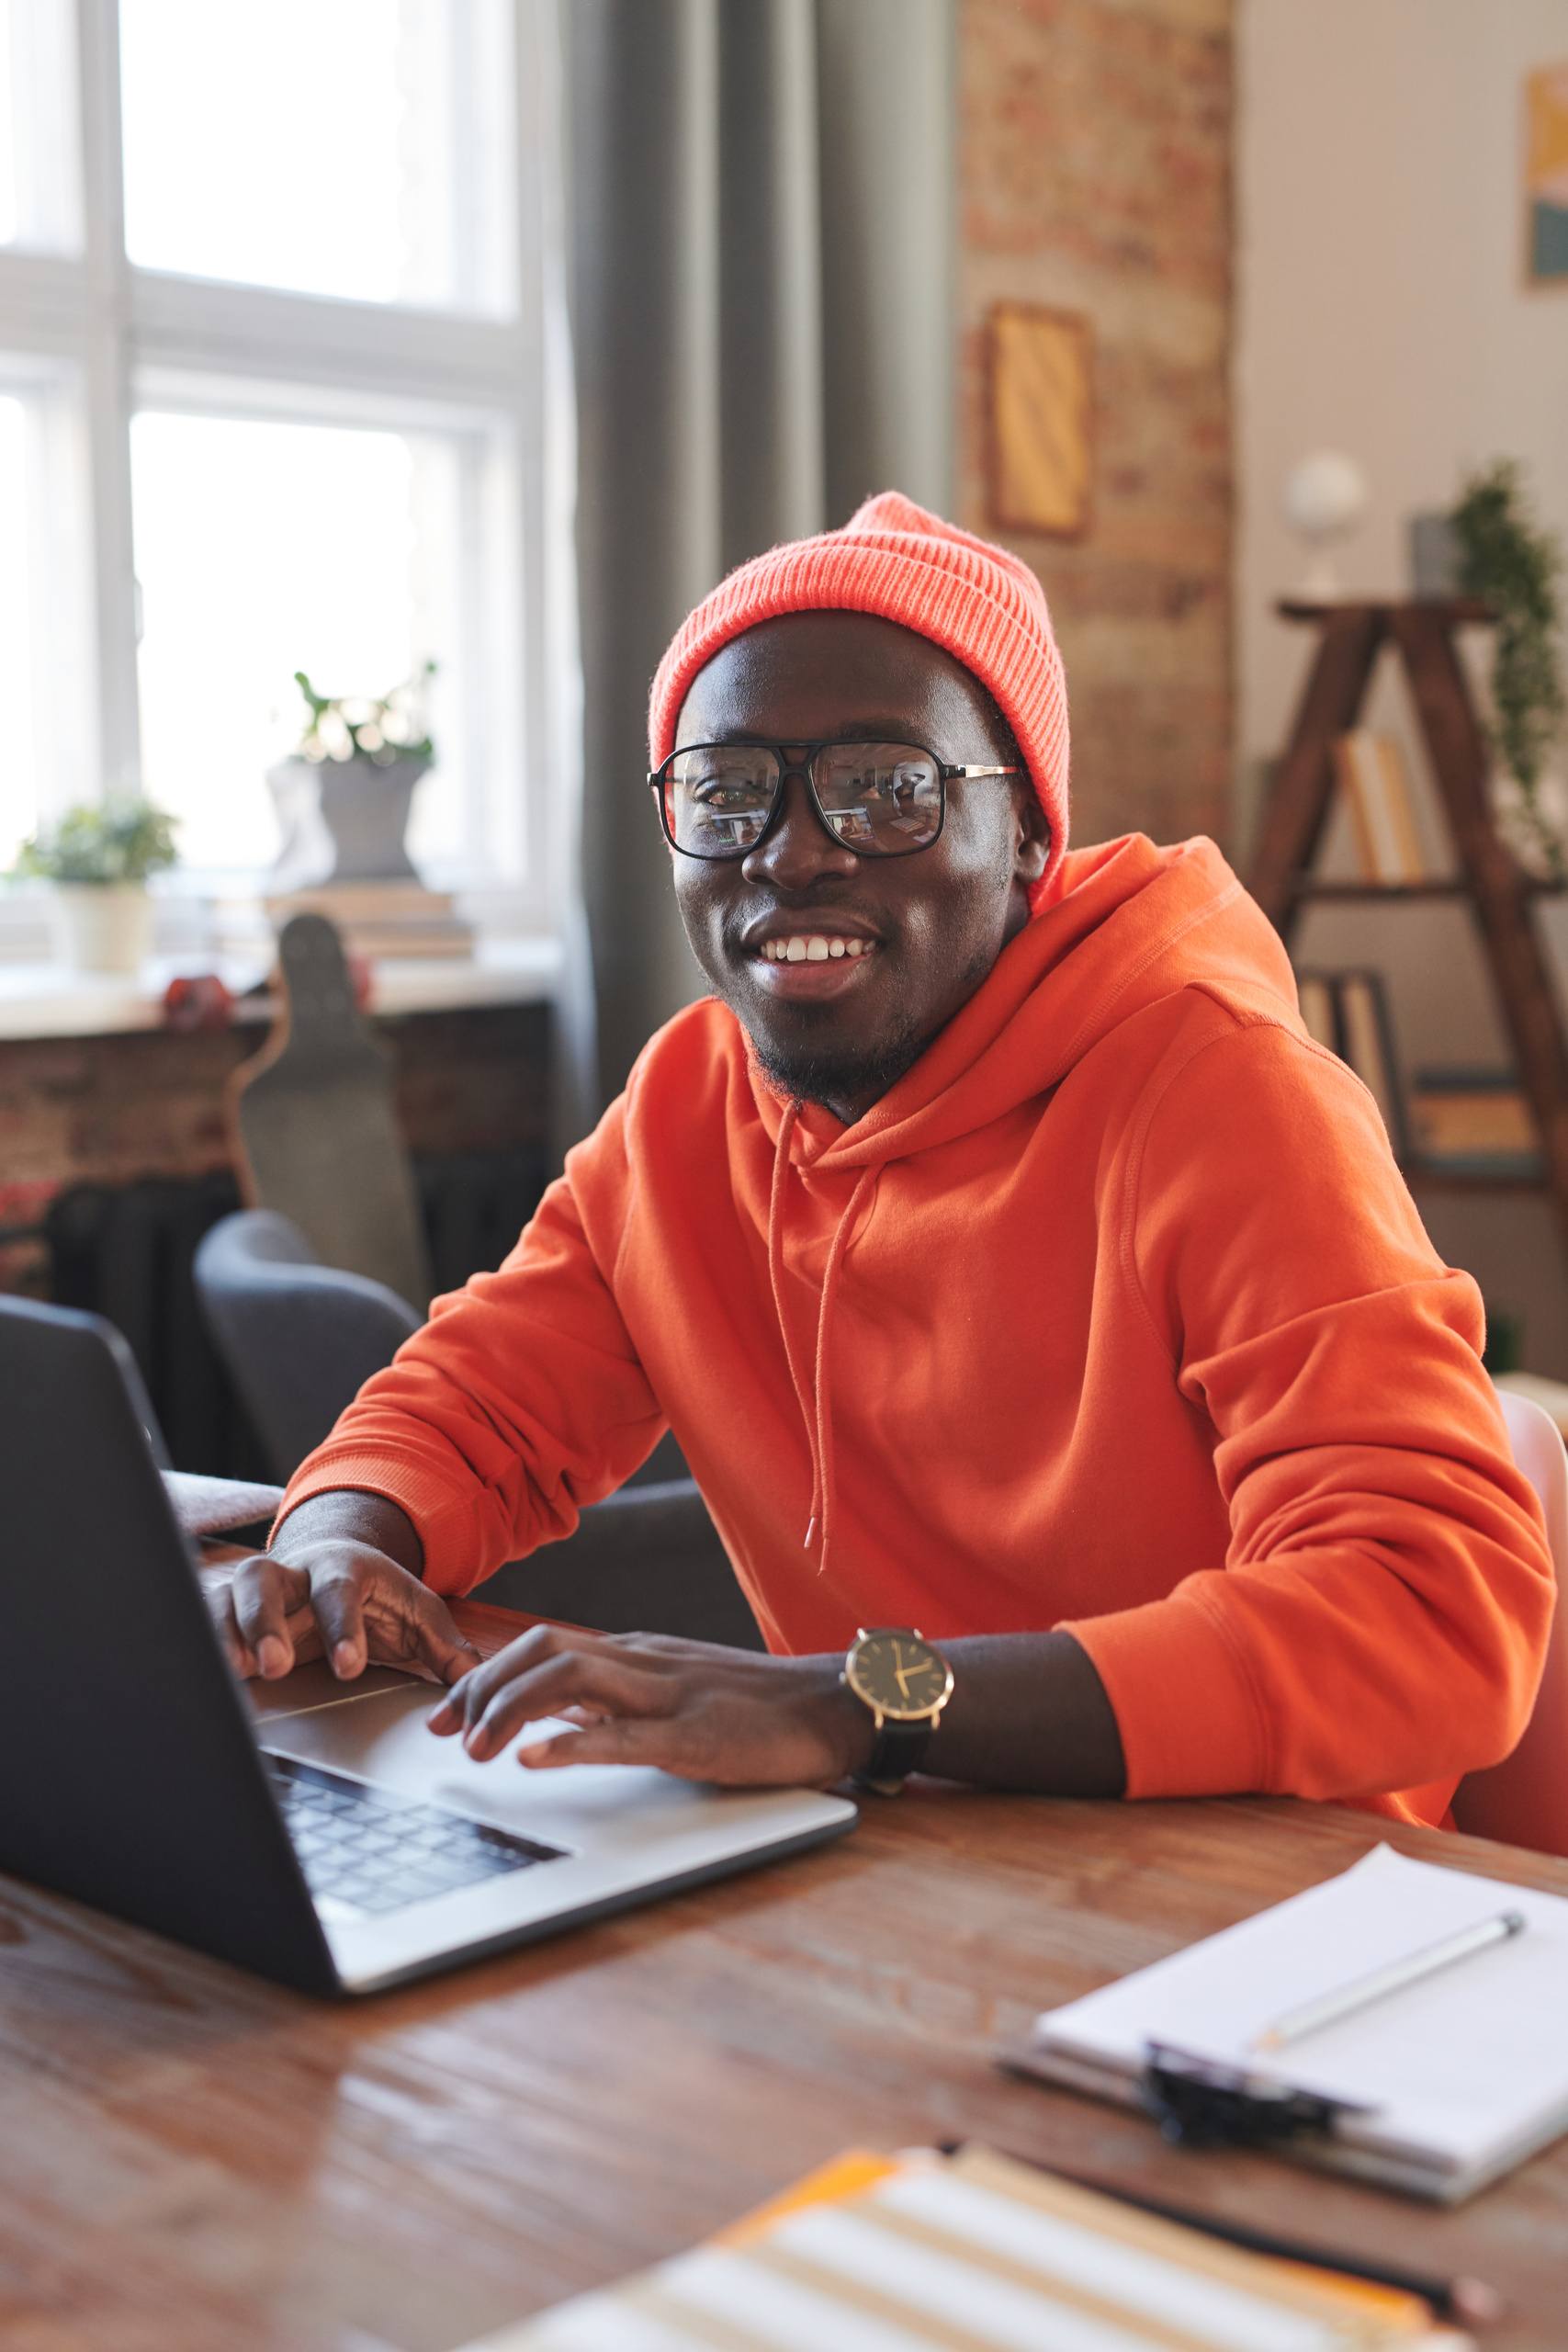 Vertical portrait of joyful African American guy wearing bright orange outfit sitting at desk at home surfing Internet on laptop smiling at camera